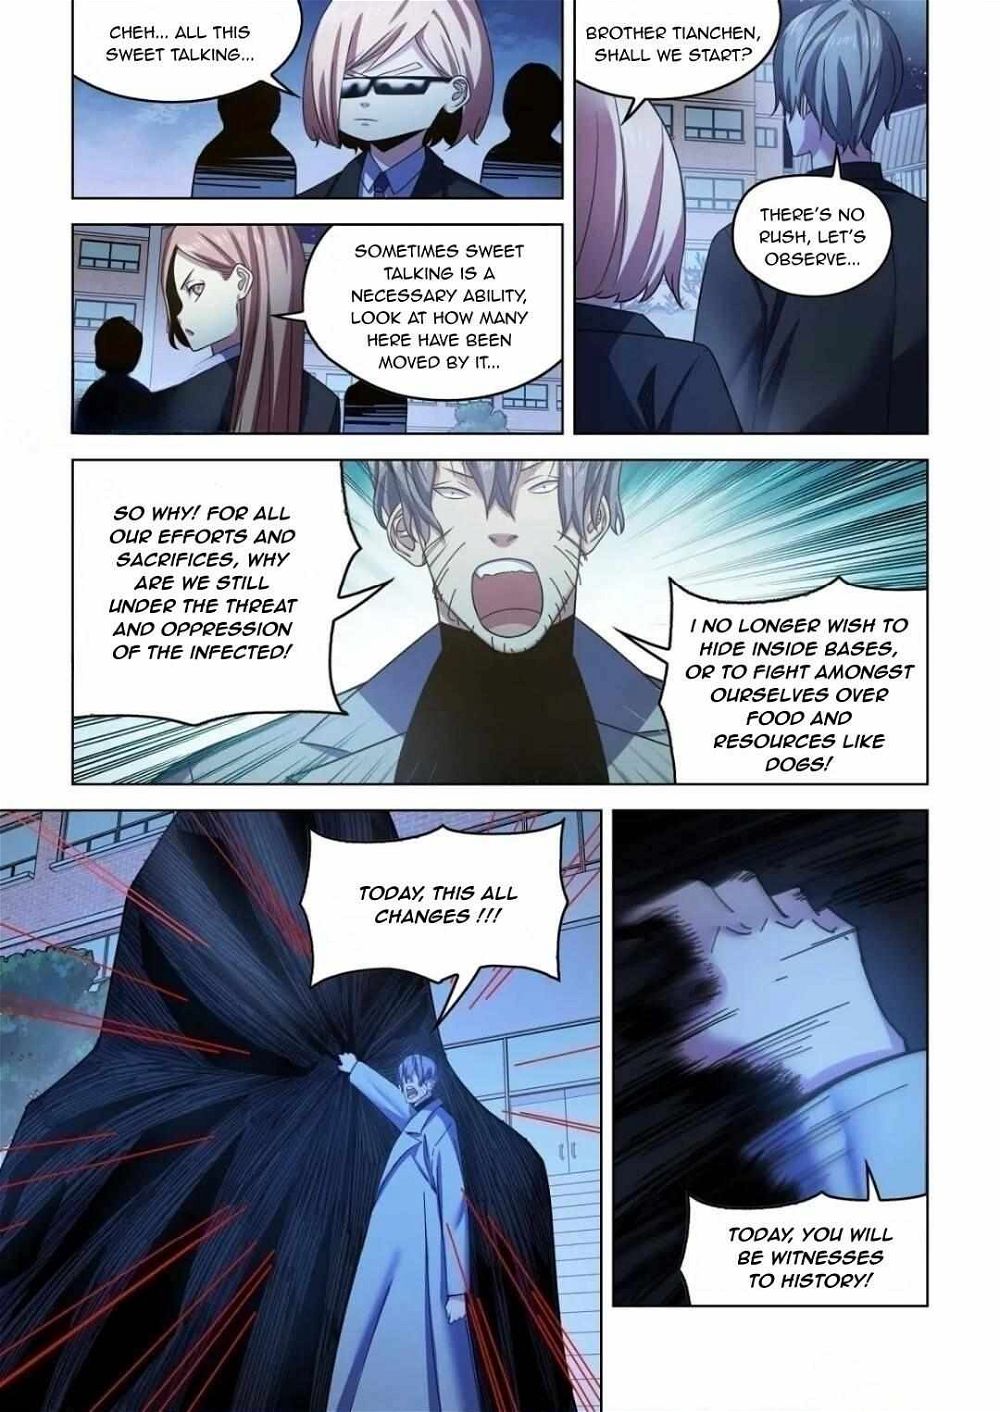 The Last Human Chapter 541 - Page 12